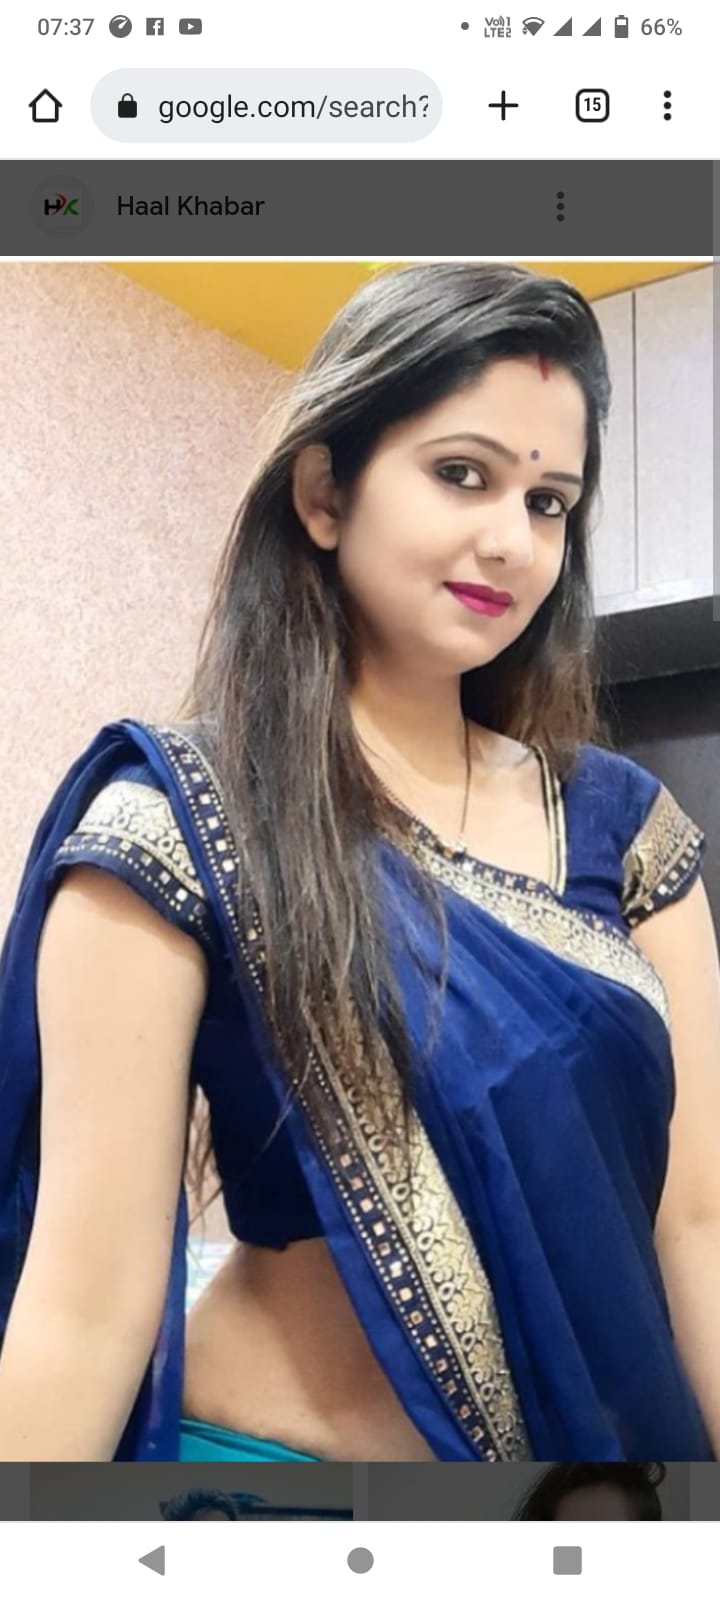 Indore Excellent Housewife Call Girls Number,9155612368,Vijay Nagar High Profile Excellent Call Girl